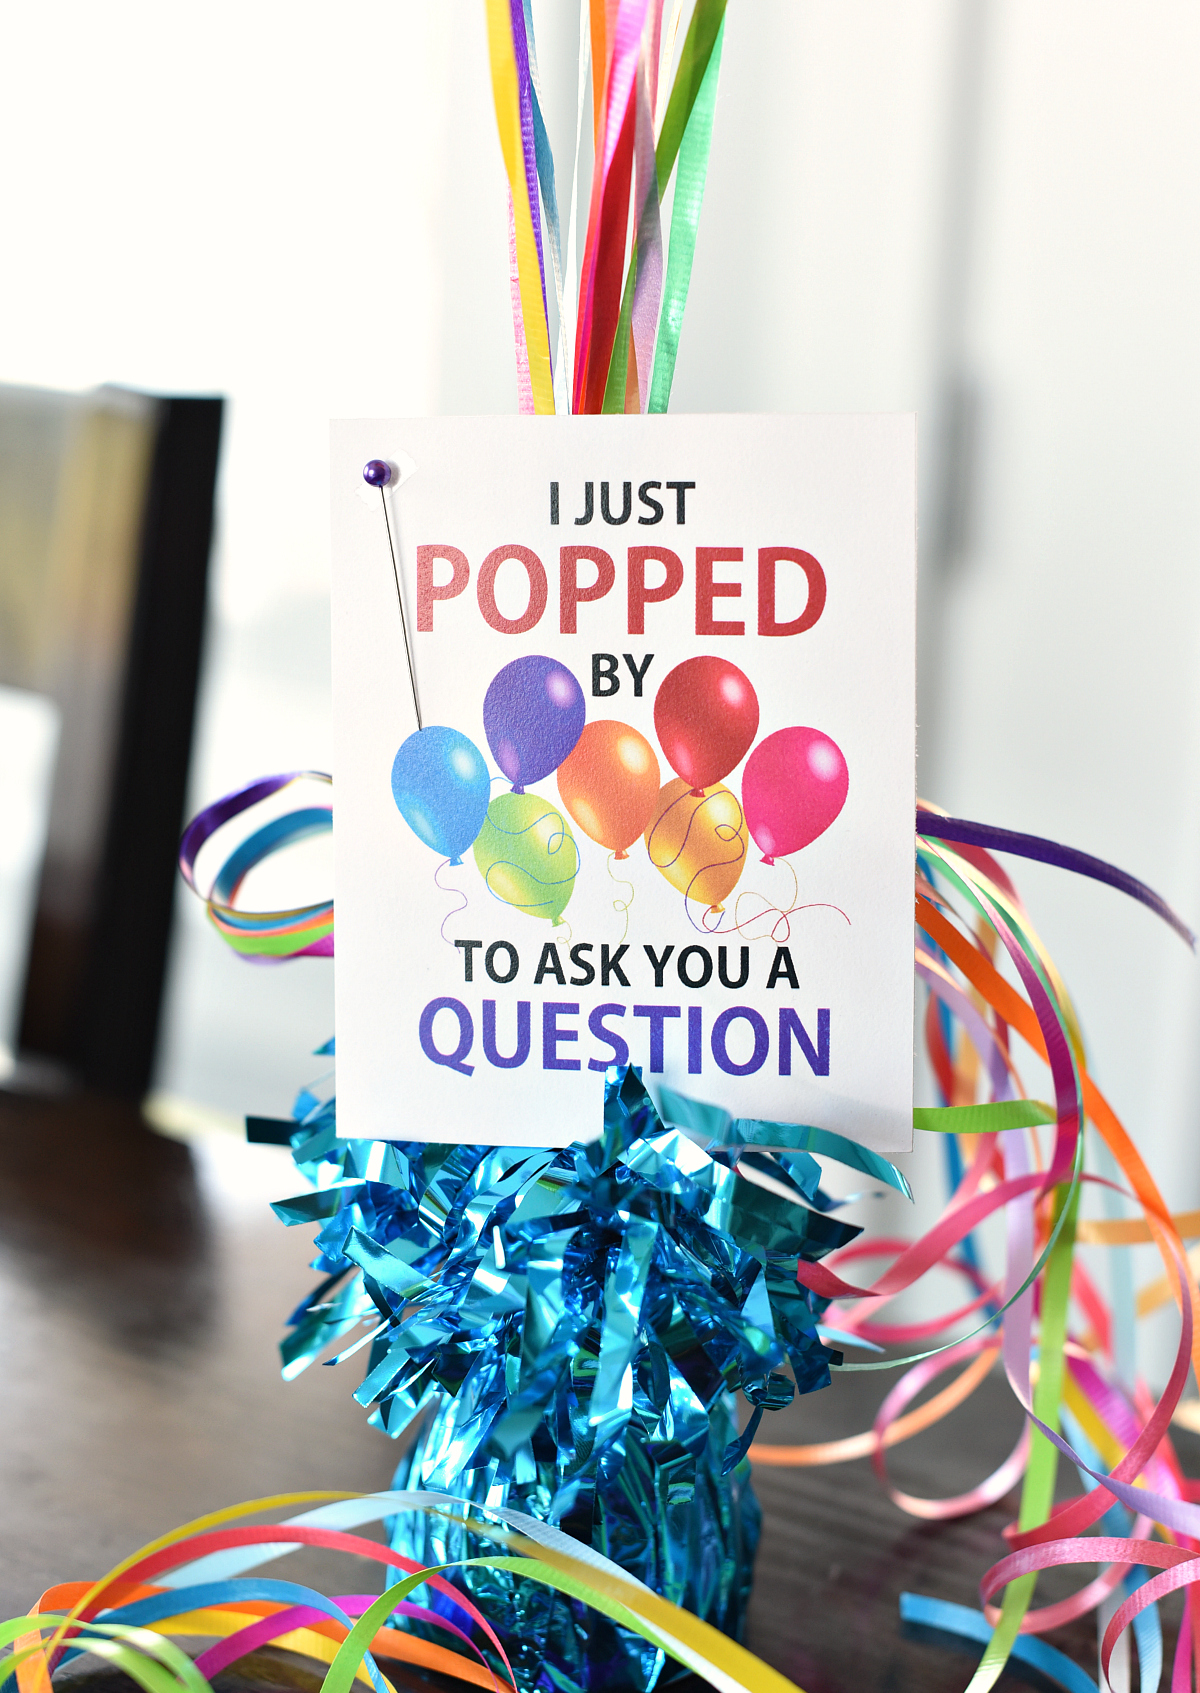 Prom and Homecoming Promposal Ideas-This cute balloon themed promposal is easy and cute, creative and fun! #promposal #dance #teens #highschool #prom #homecoming